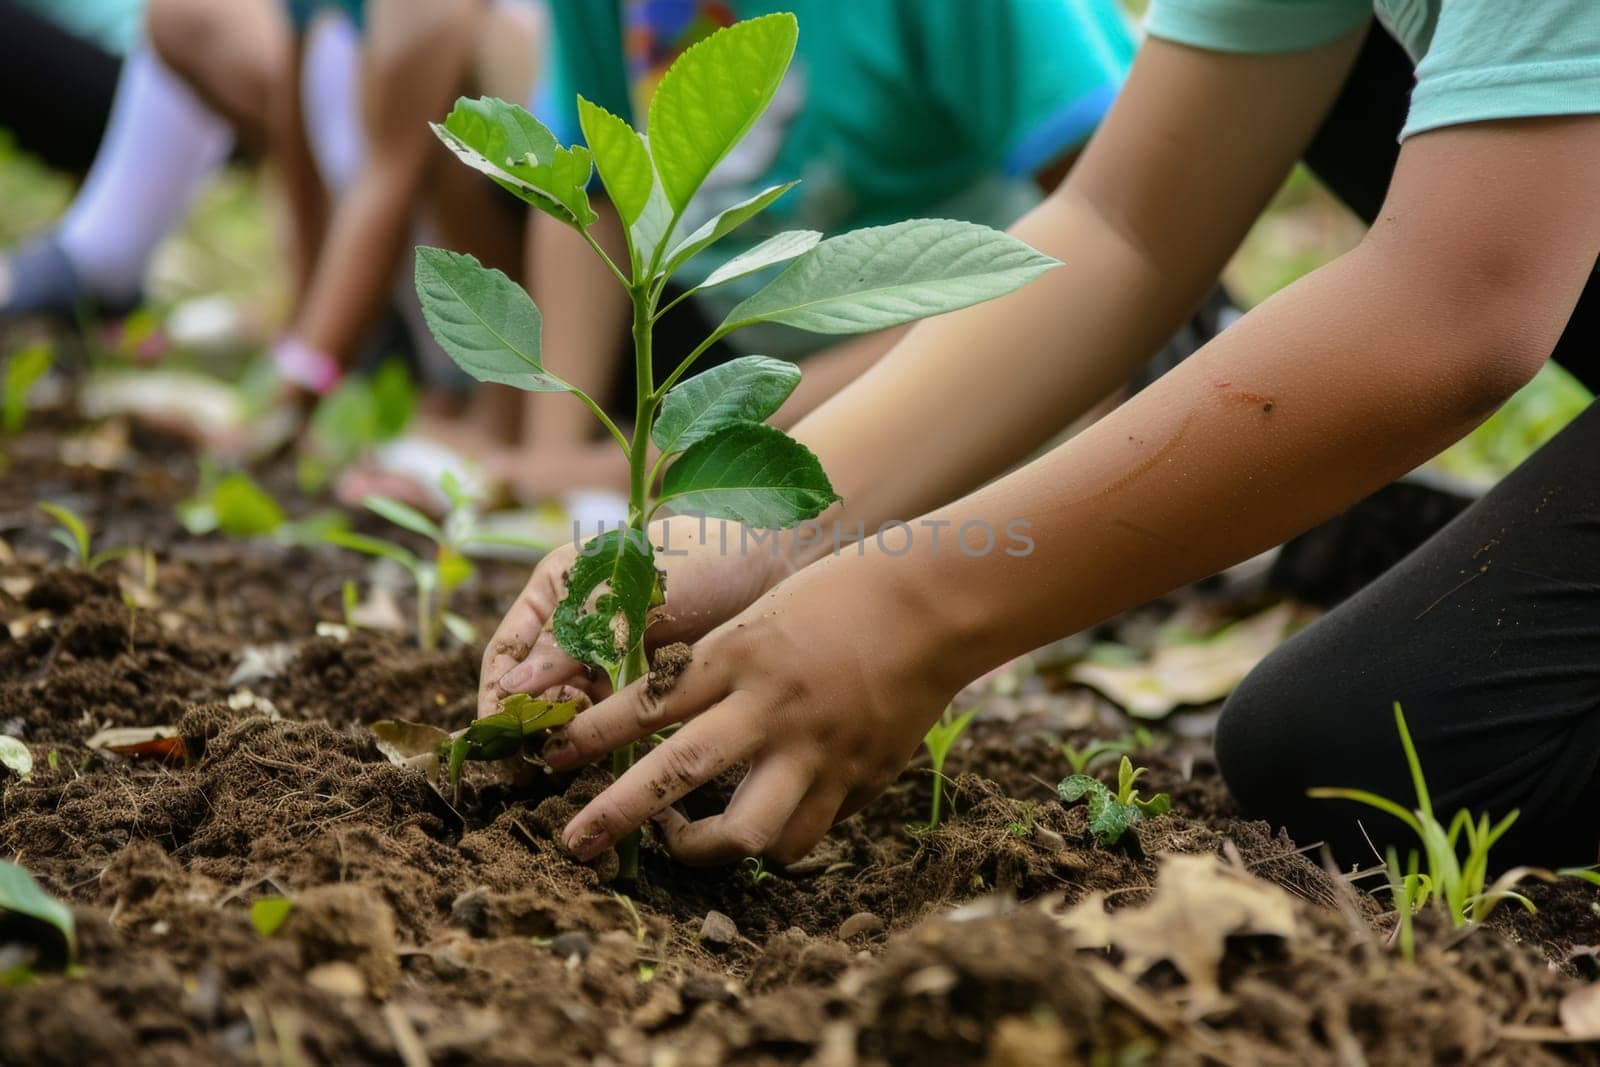 Hands carefully planting a sapling in fertile soil, symbolizing growth, renewal, and the importance of environmental stewardship.